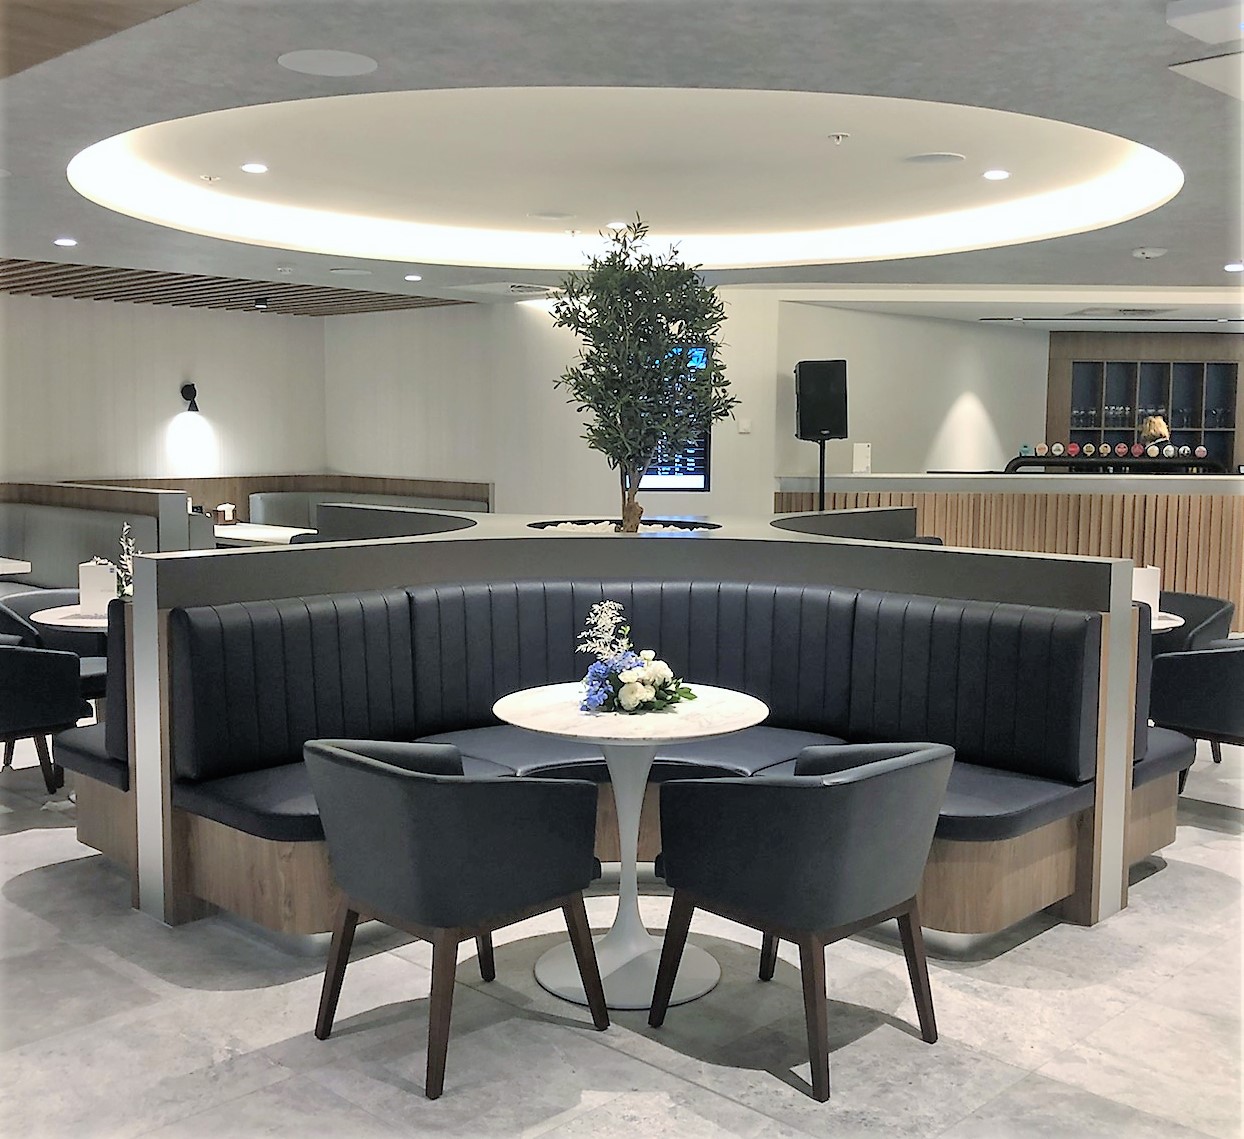 American Express Lounge, Sydney Airport: Dining area